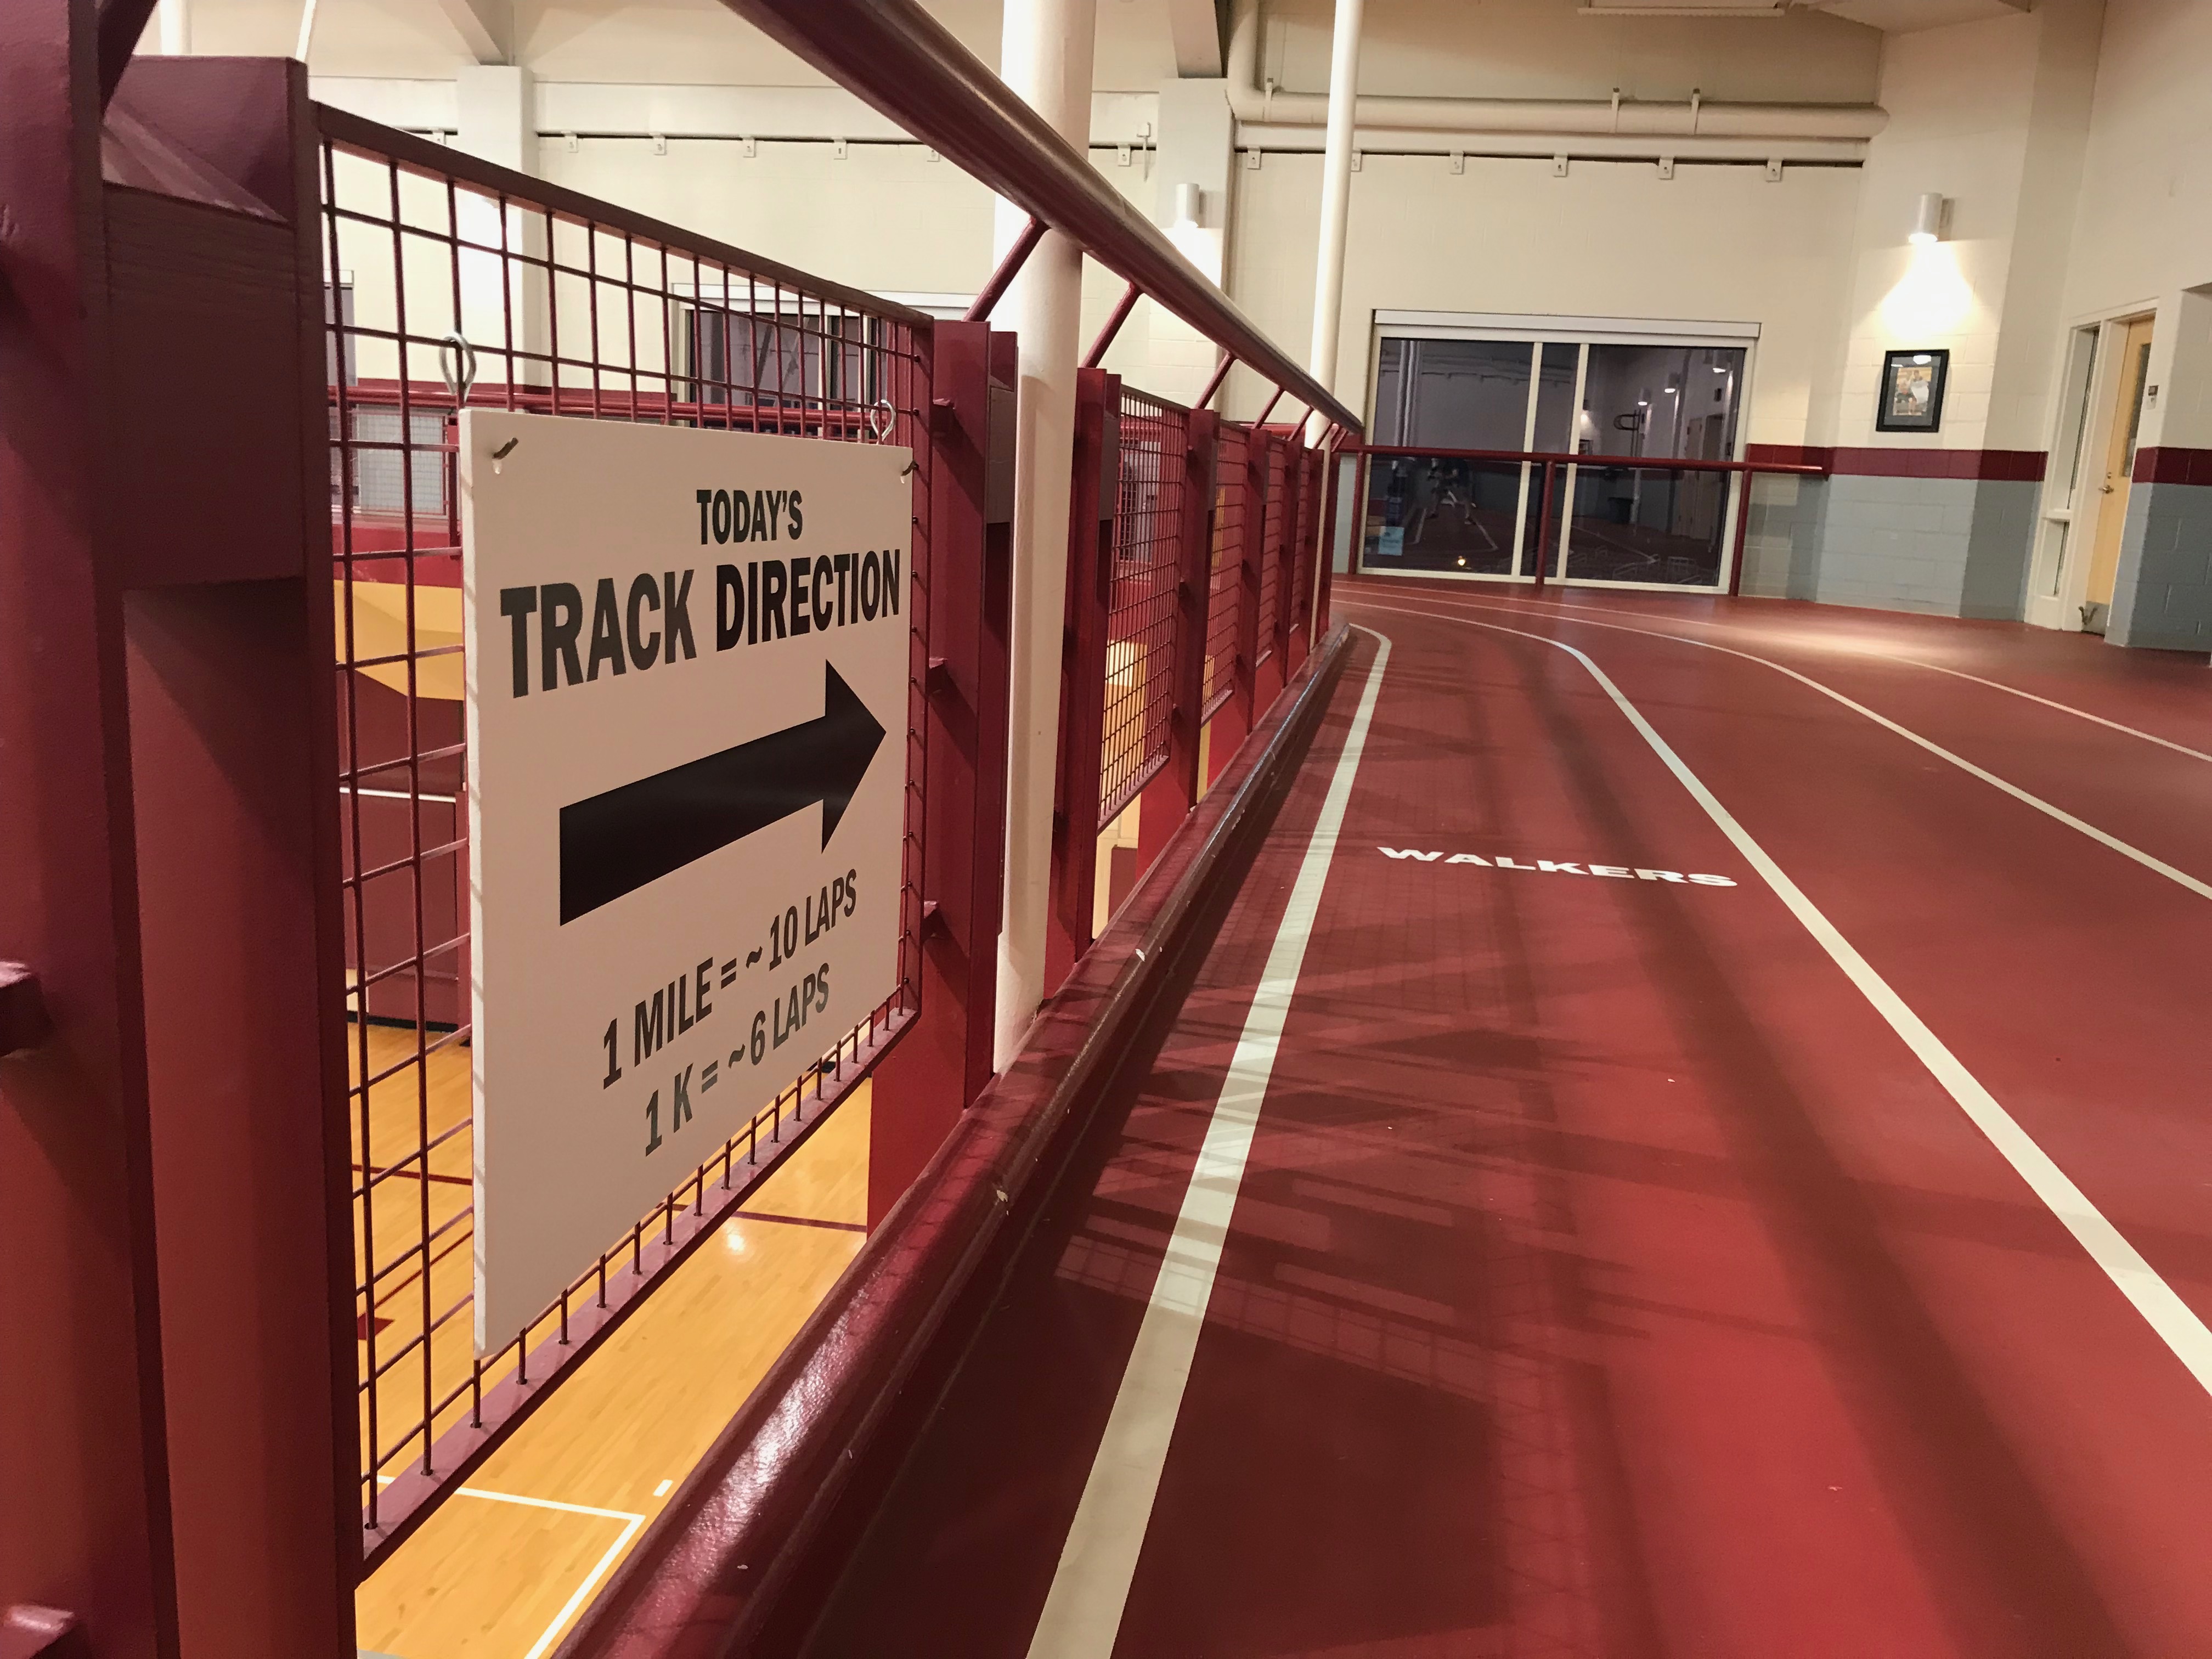 An indoor track with the "today's direction" sign.